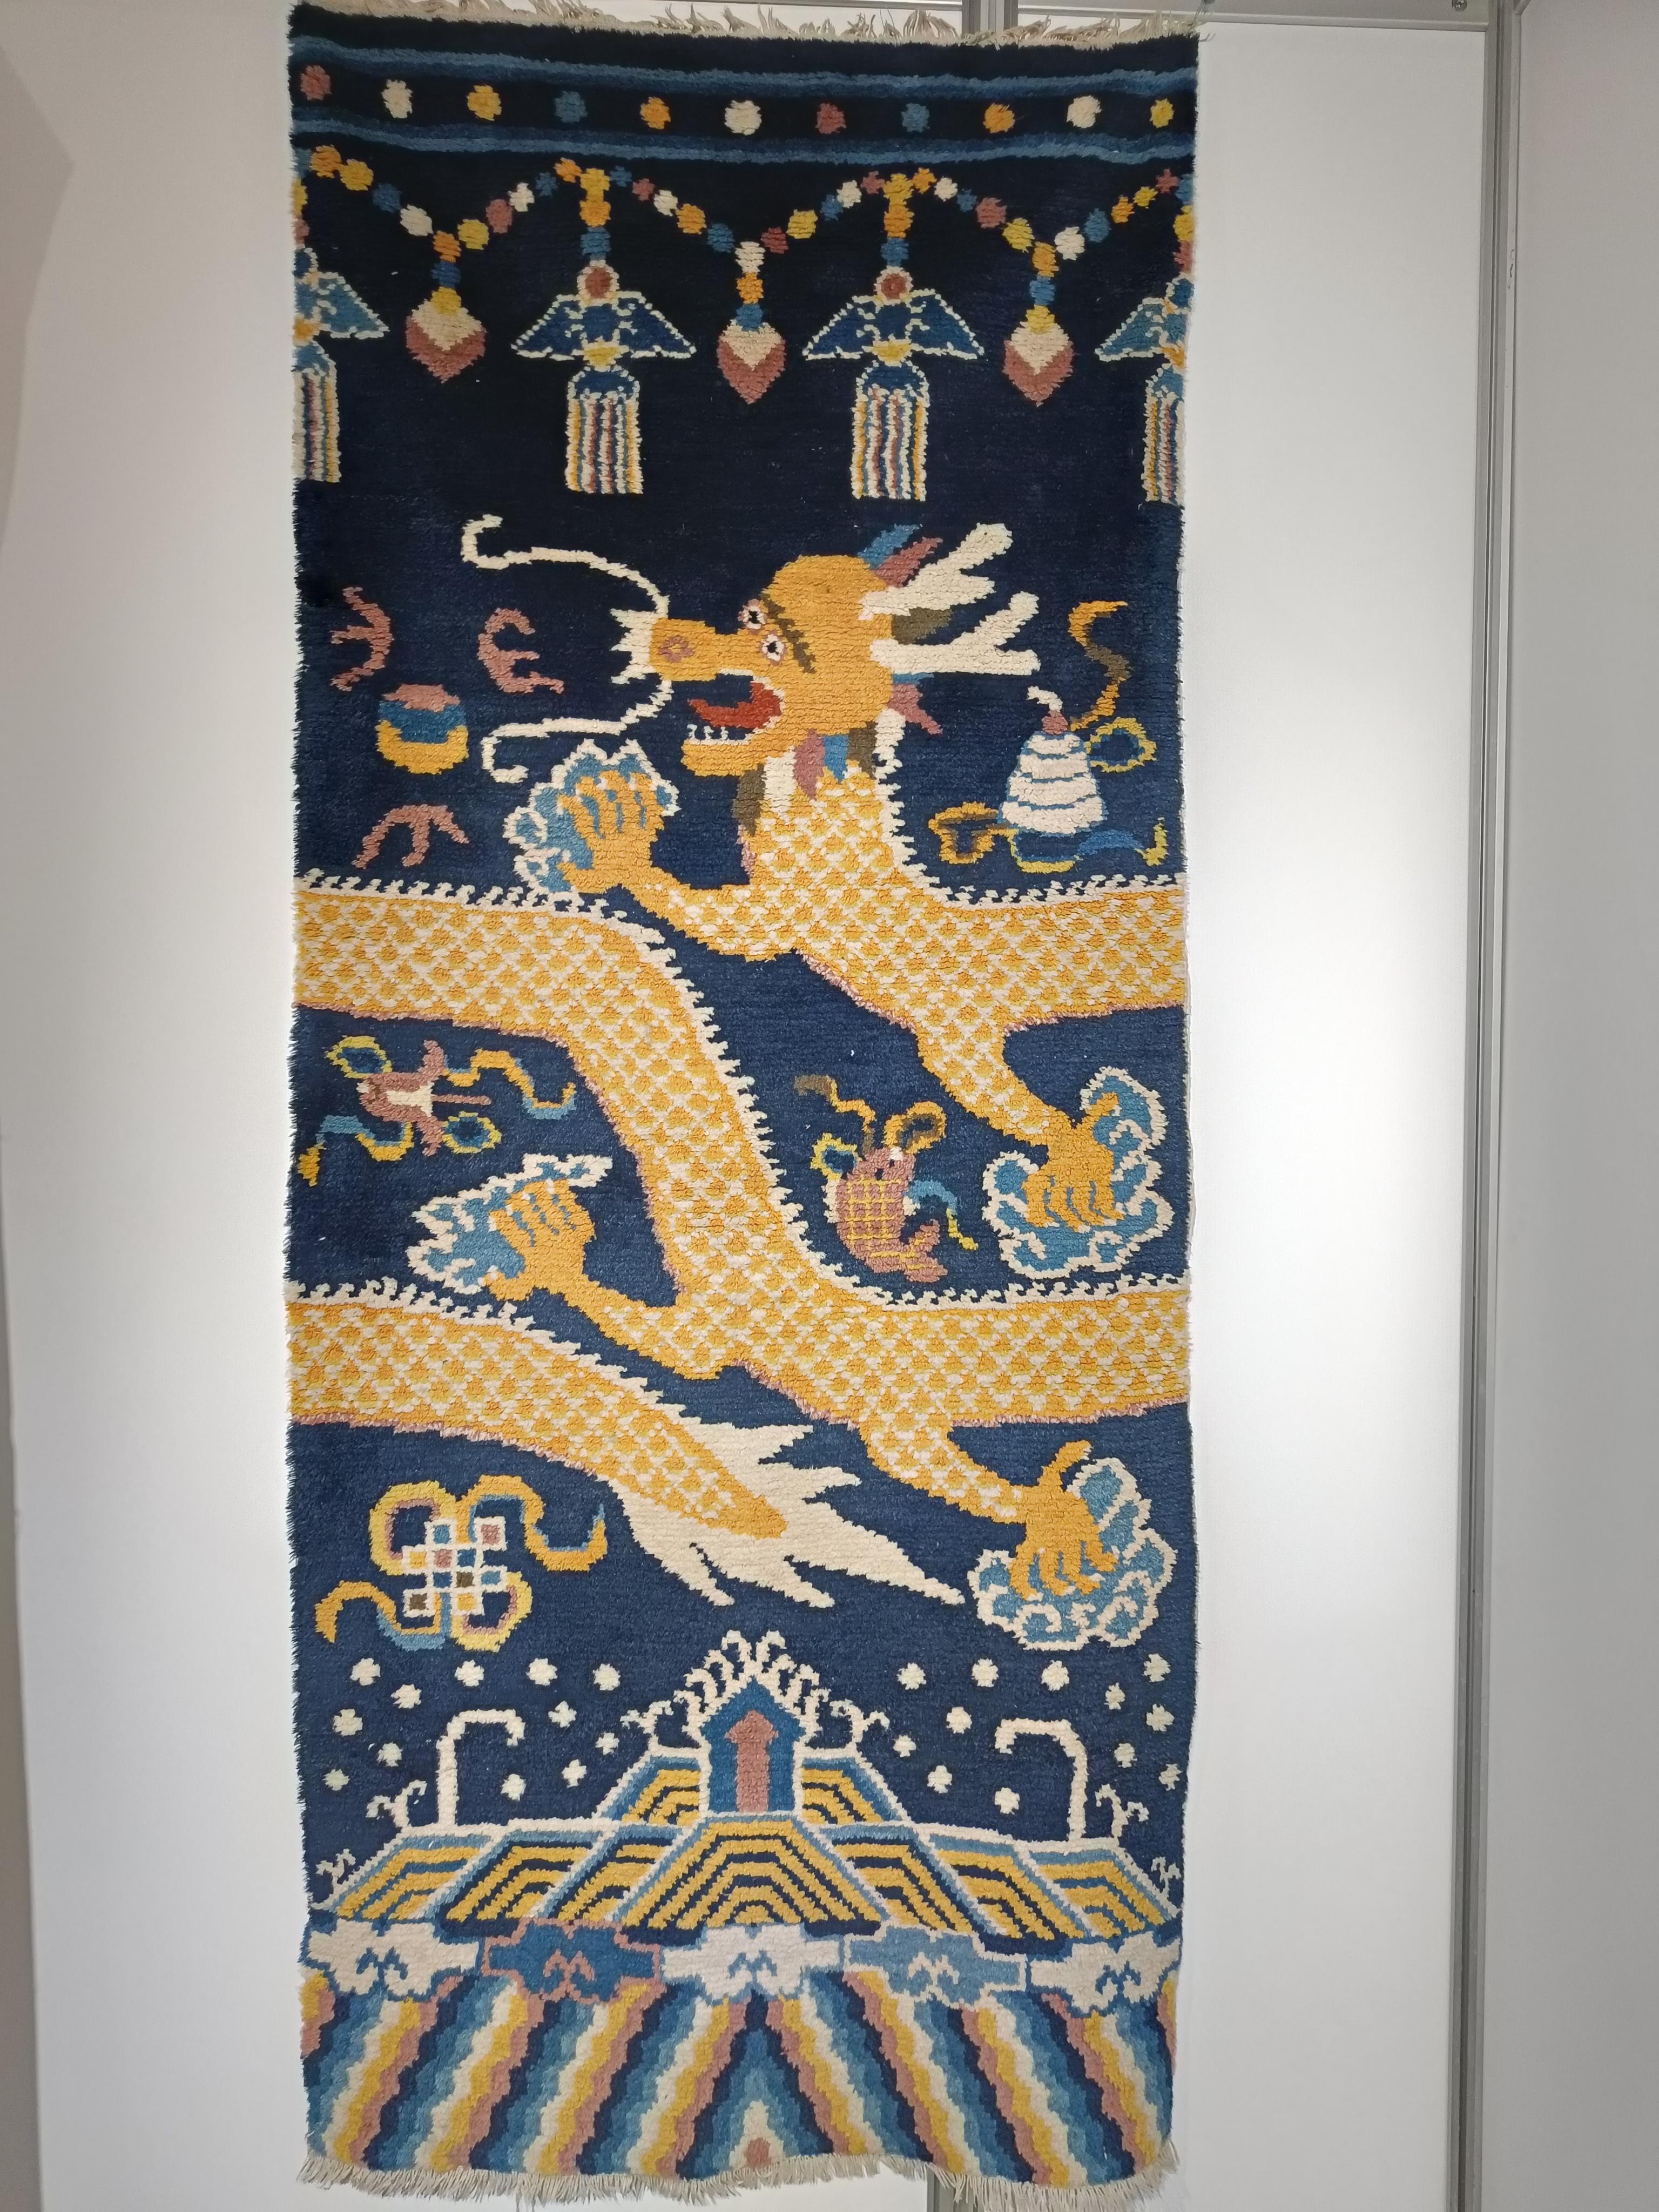  
Vintage Sino Tibetan Dragon rug carpet China Asian 
A fine Tibetan vintage wool dragon rug with a Temple scene with hanging lanterns a yellow dragon encircling on a blue background.
Period mid 20th century
Size 185 x 90cm
Condition fine